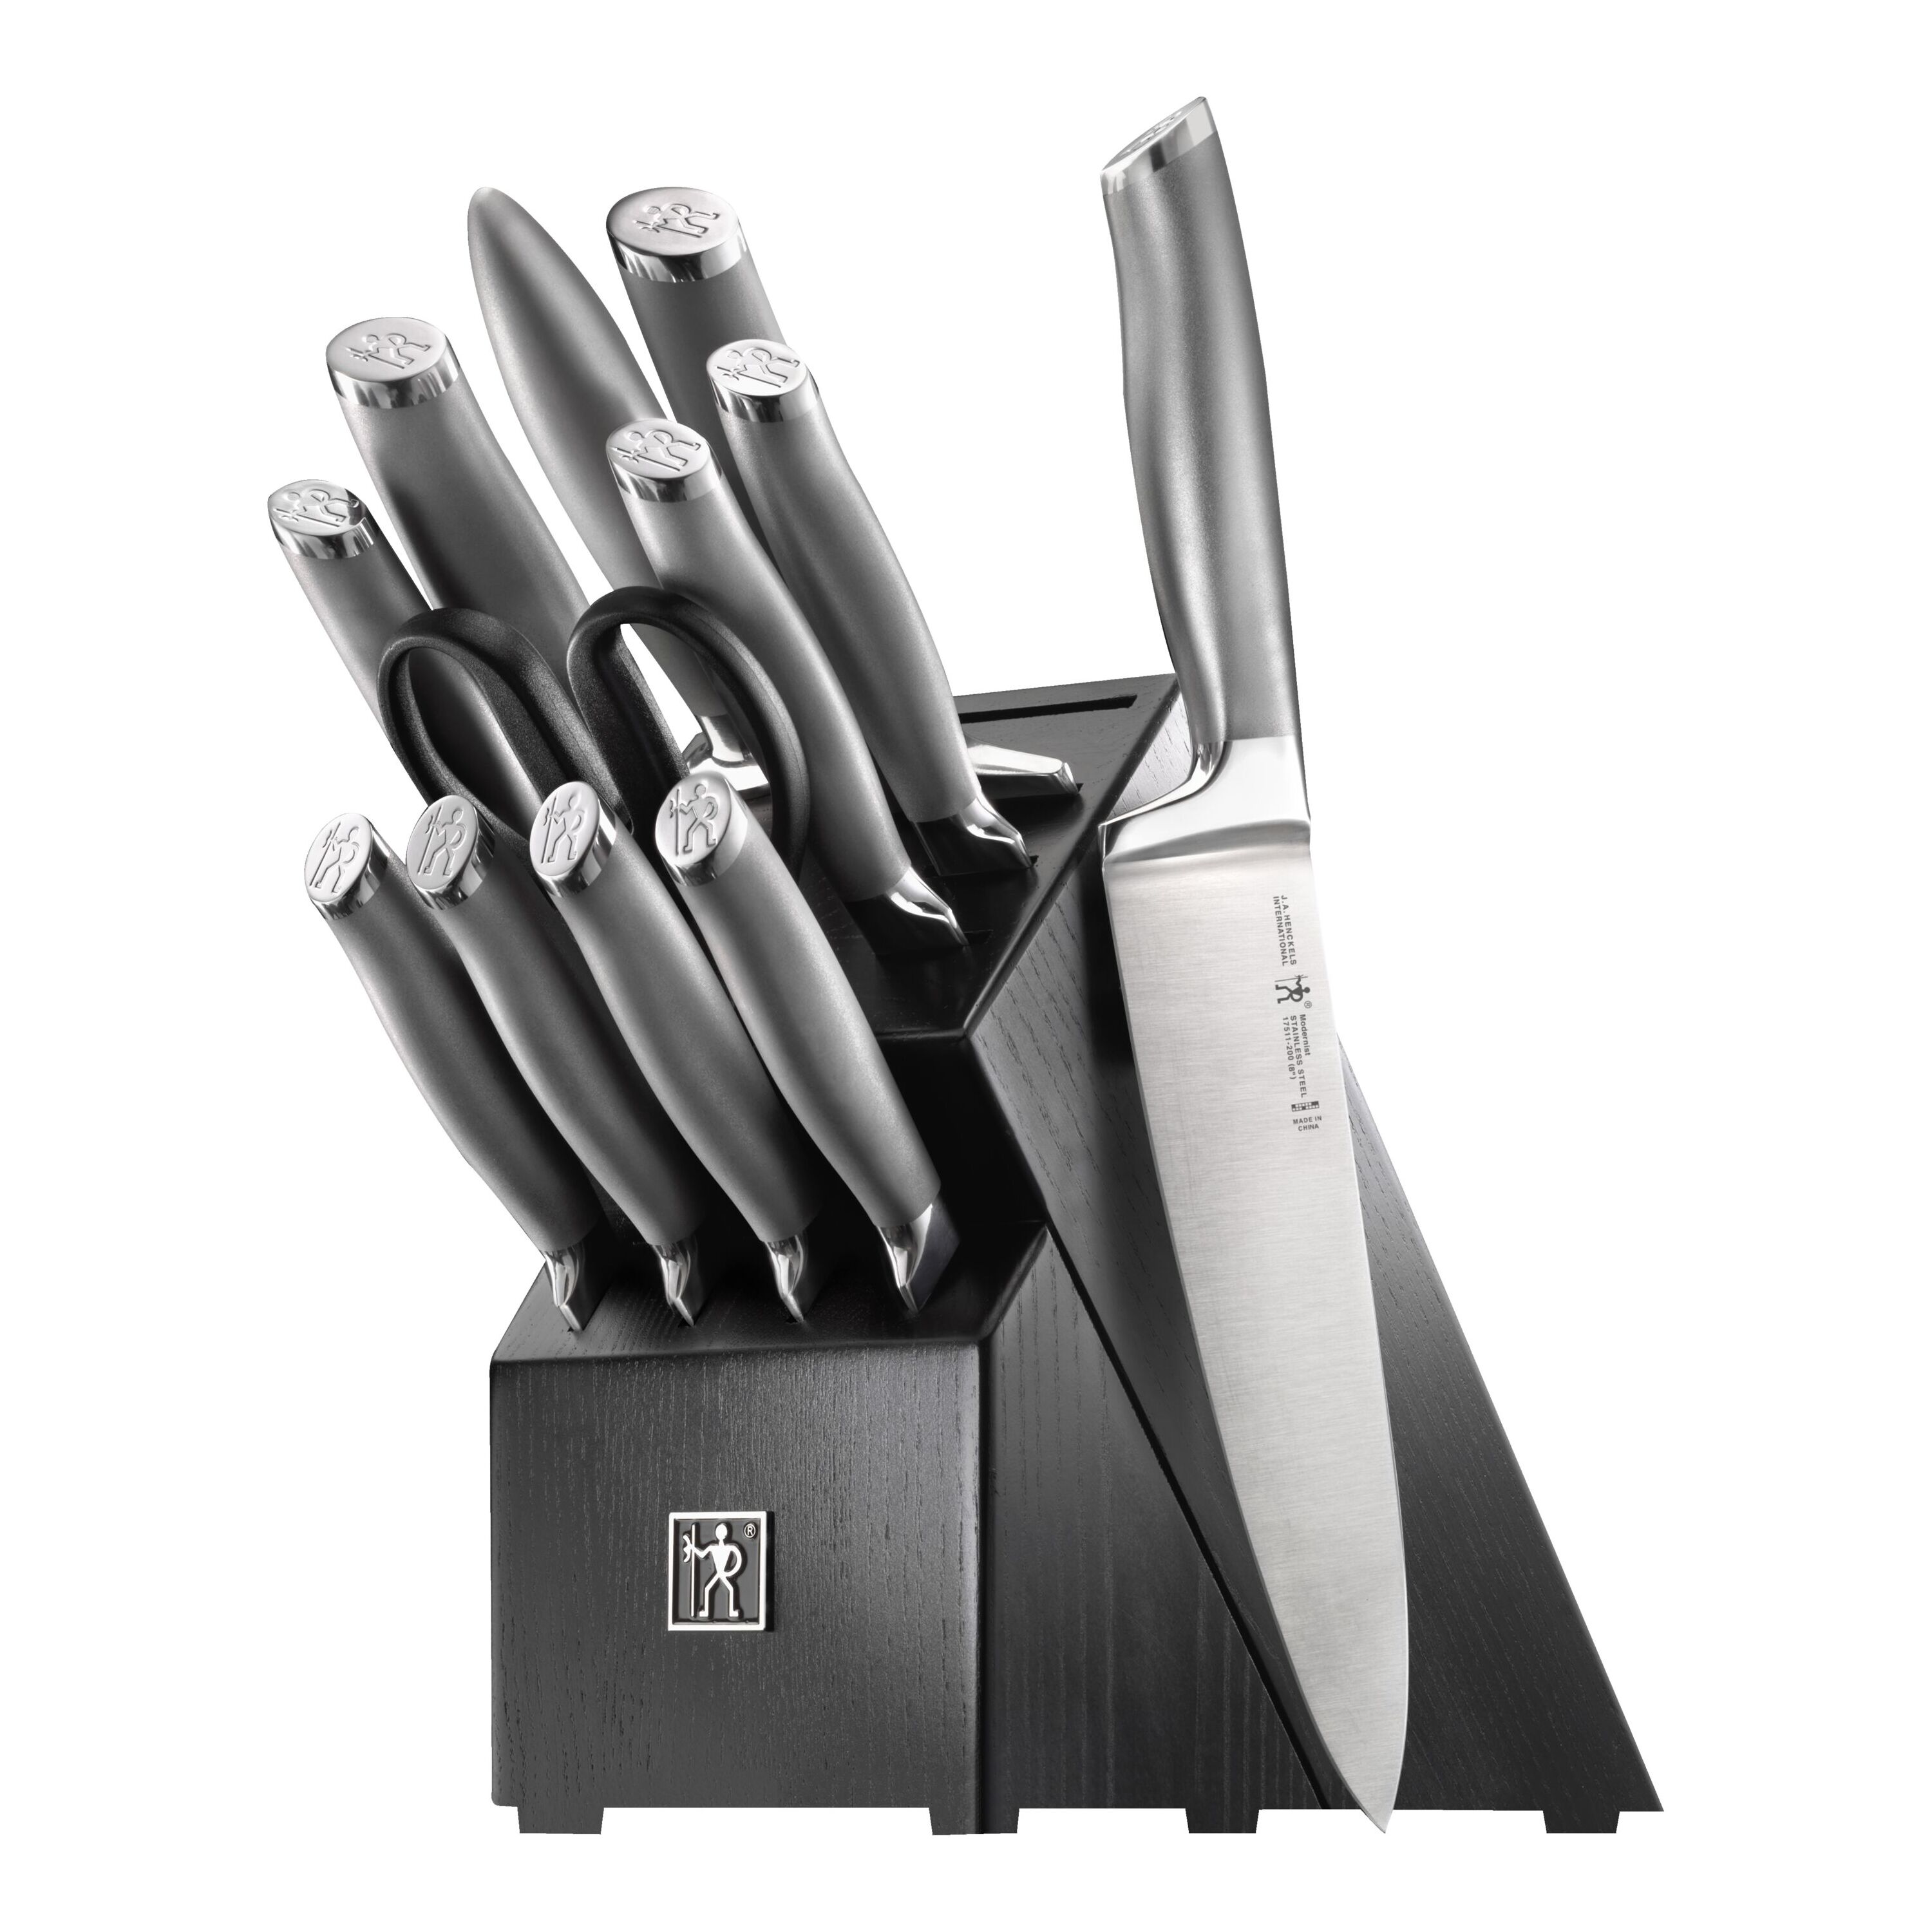 Zwilling J.a. Henckels International Forged Synergy 13 Pc. Knife Block Set, Cutlery, Household